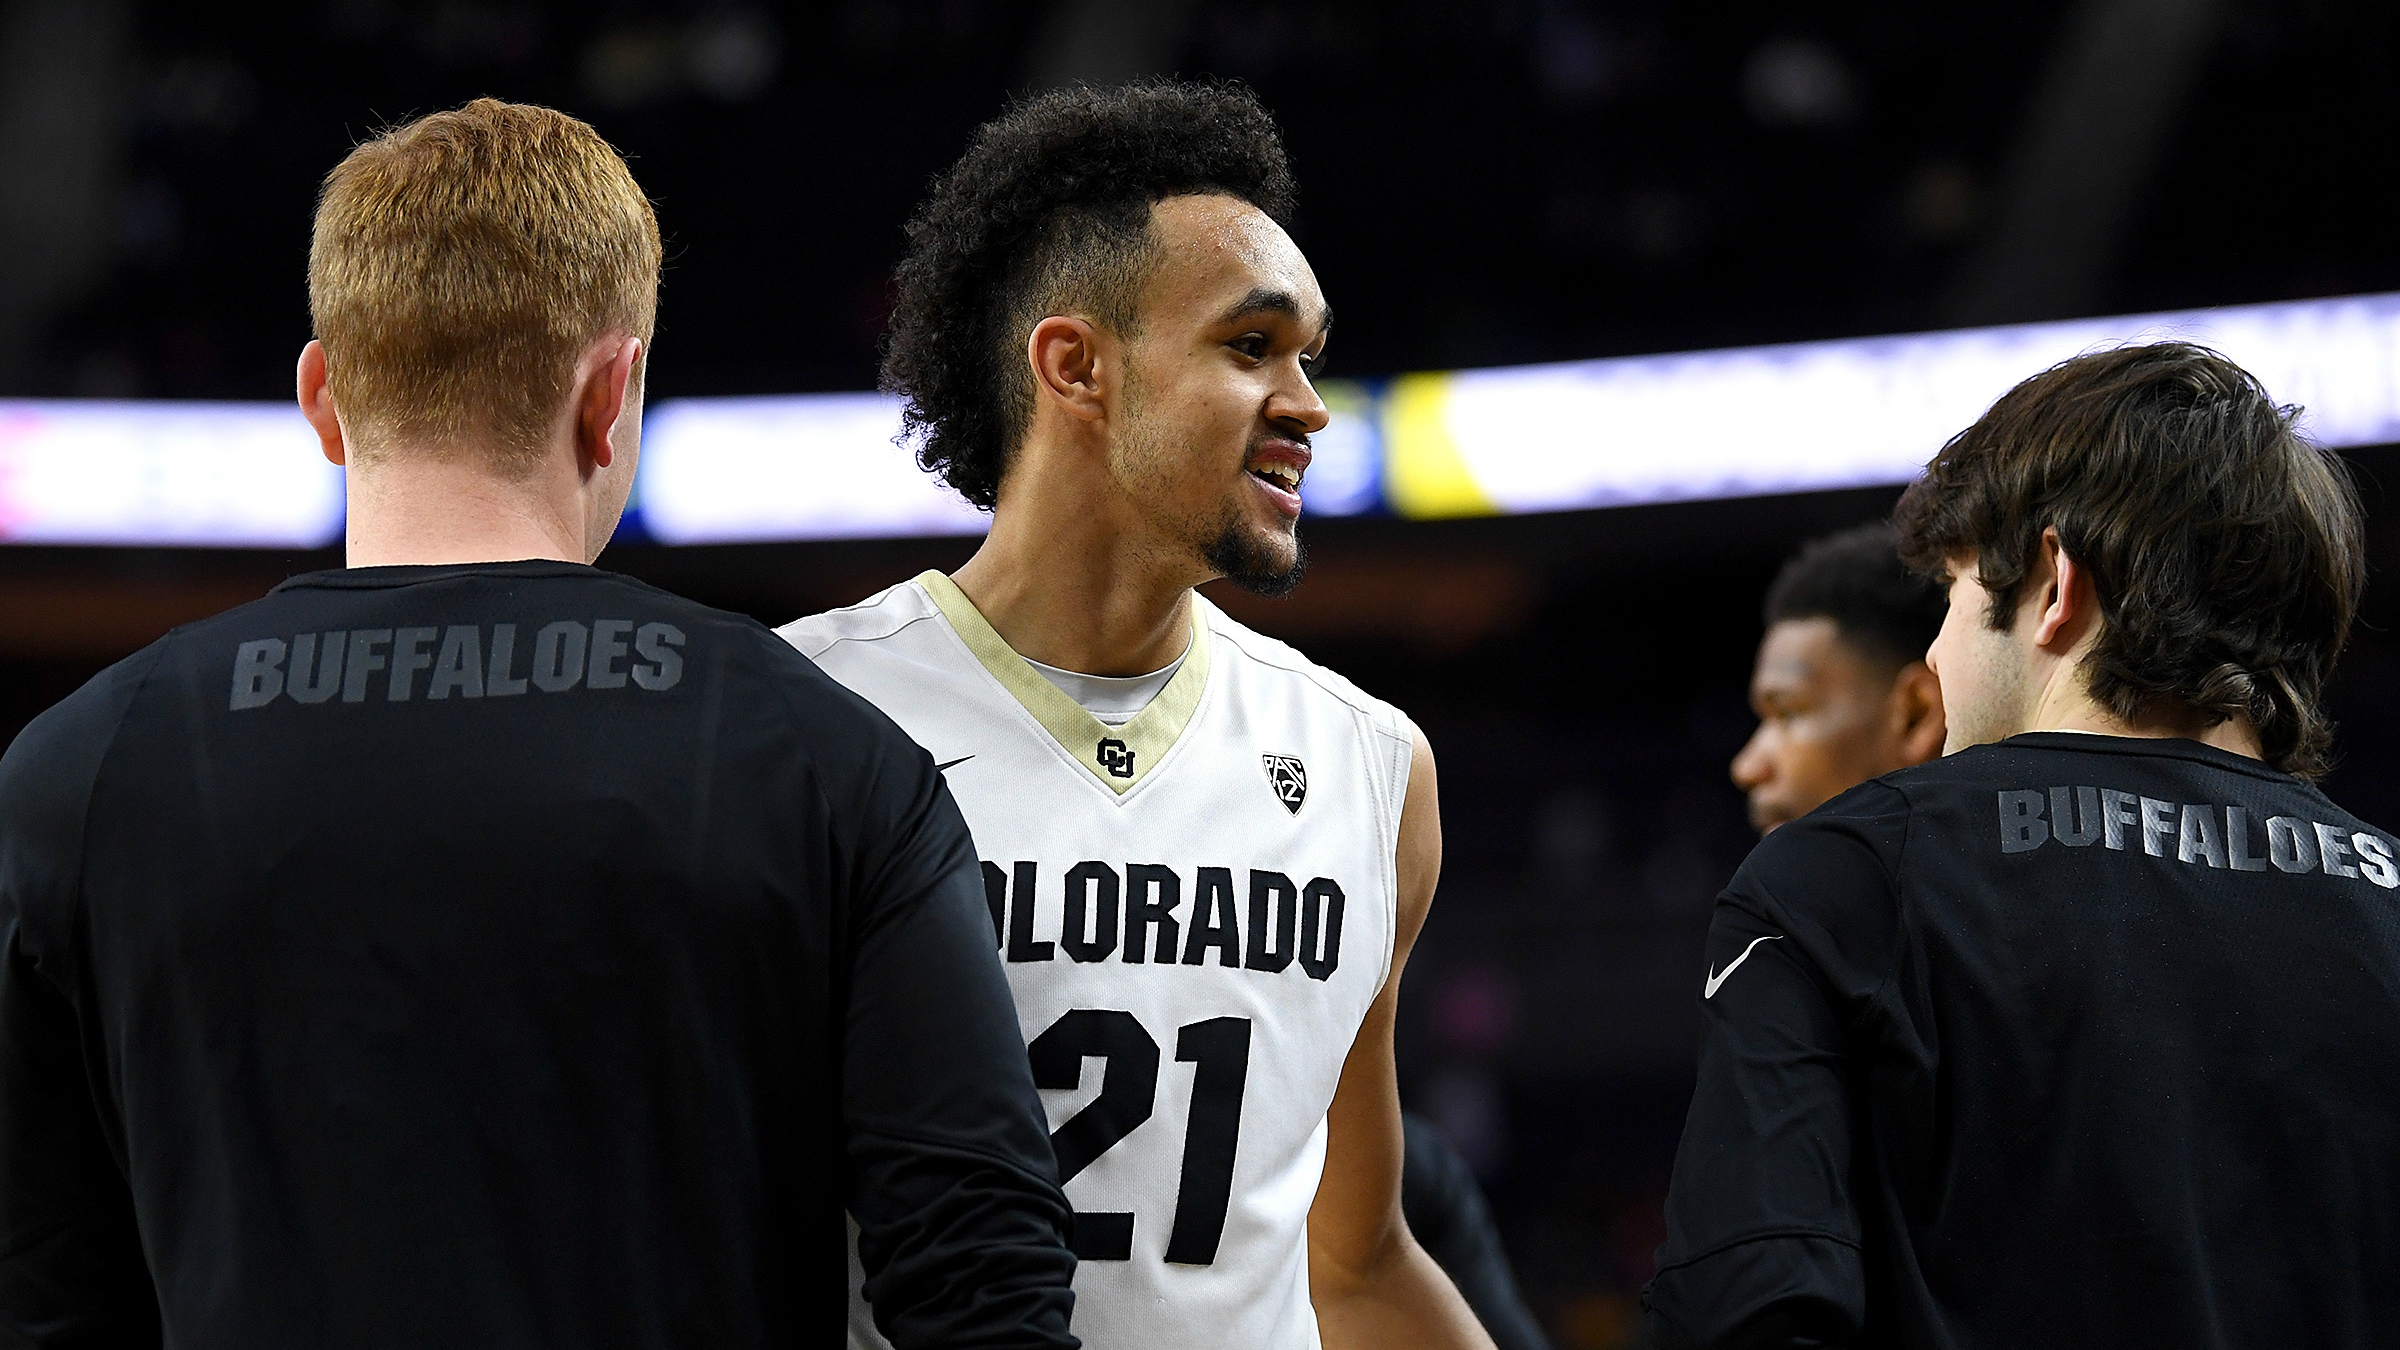 Derrick White started as the ultimate underdog in his journey to